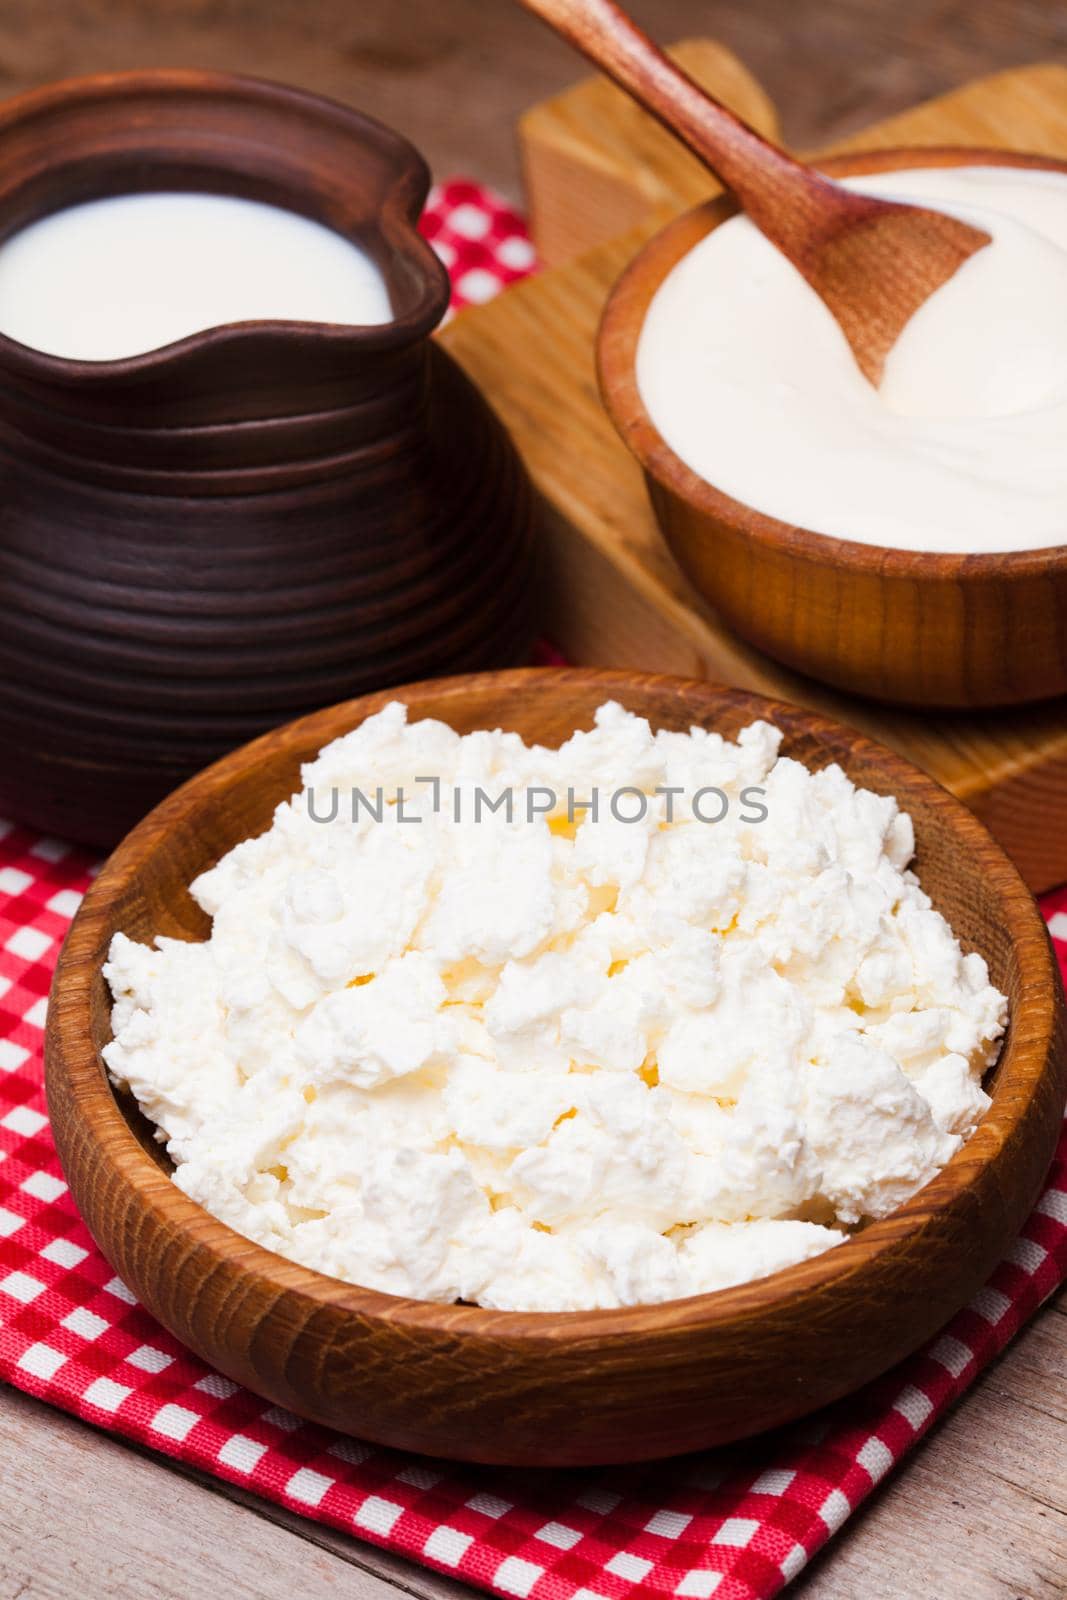 Cottage cheese by oksix